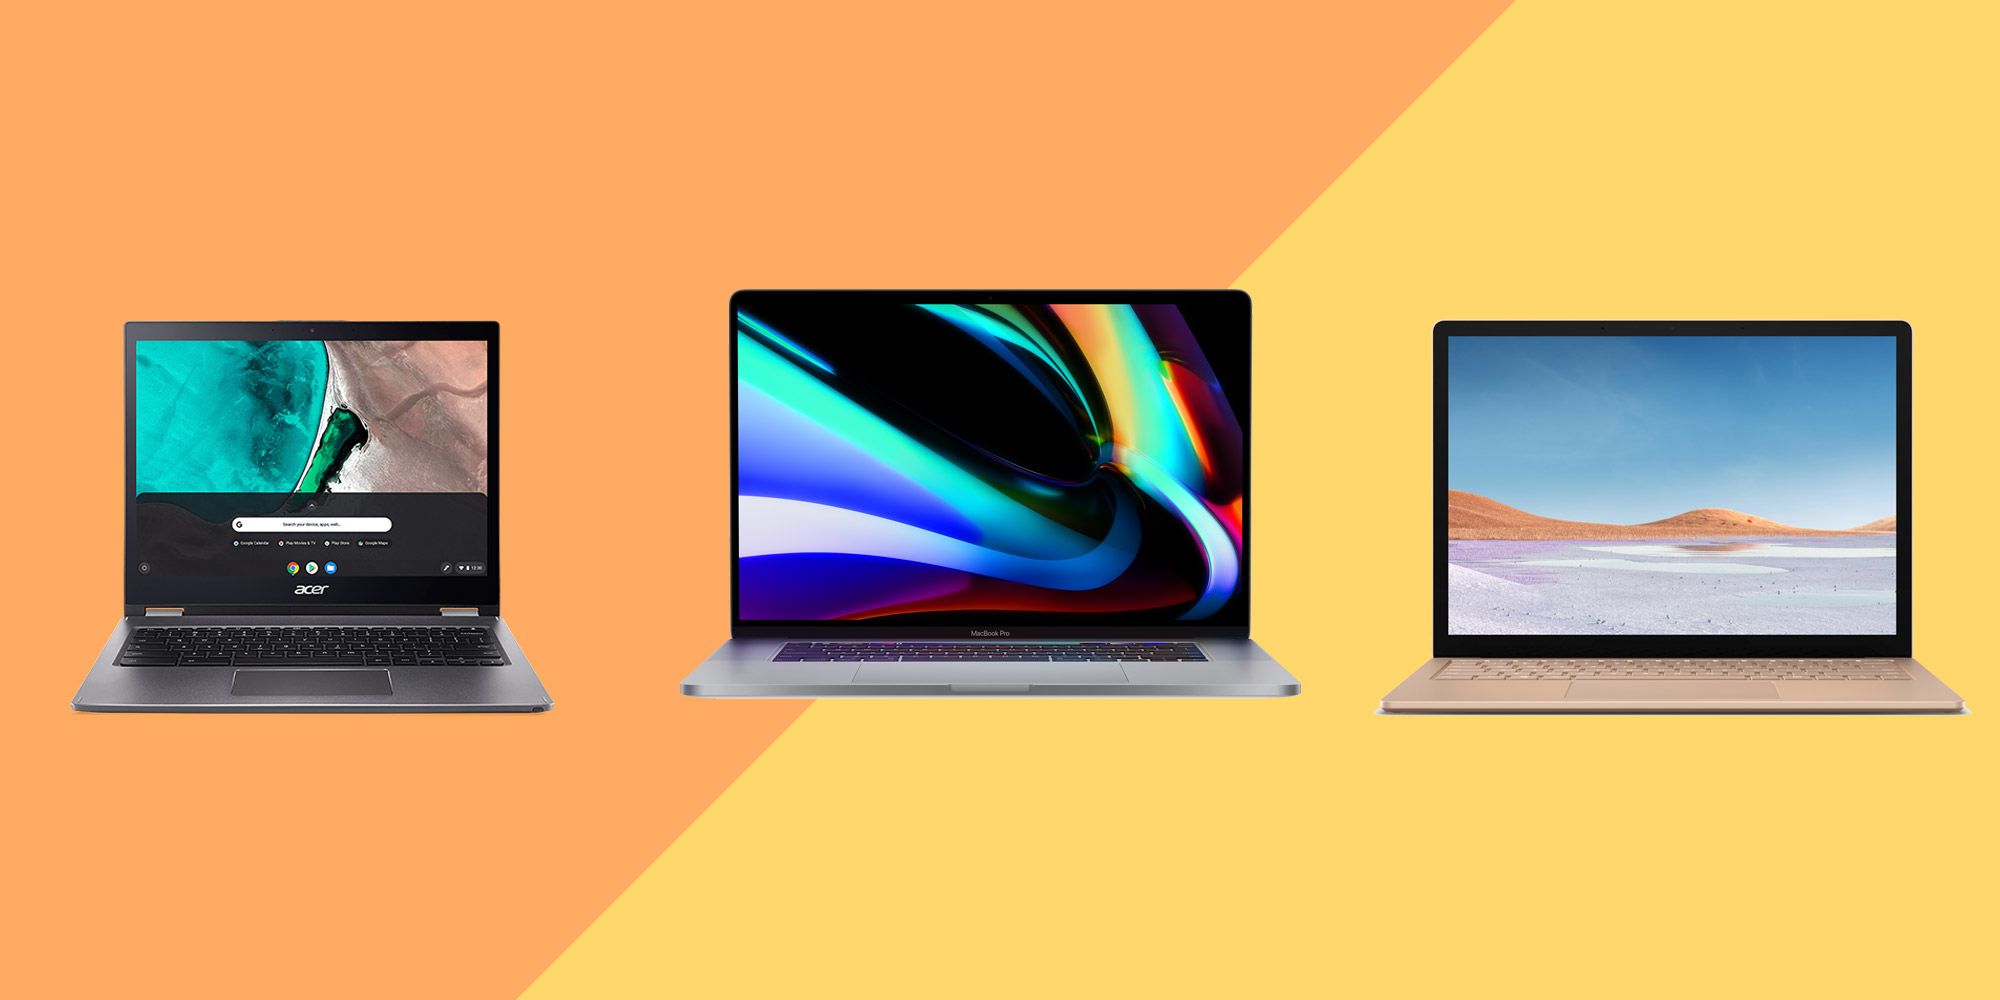 Best Laptops For High School Students 2021 Best laptops 2020: 11 top laptops from Windows, Apple and Chrome OS